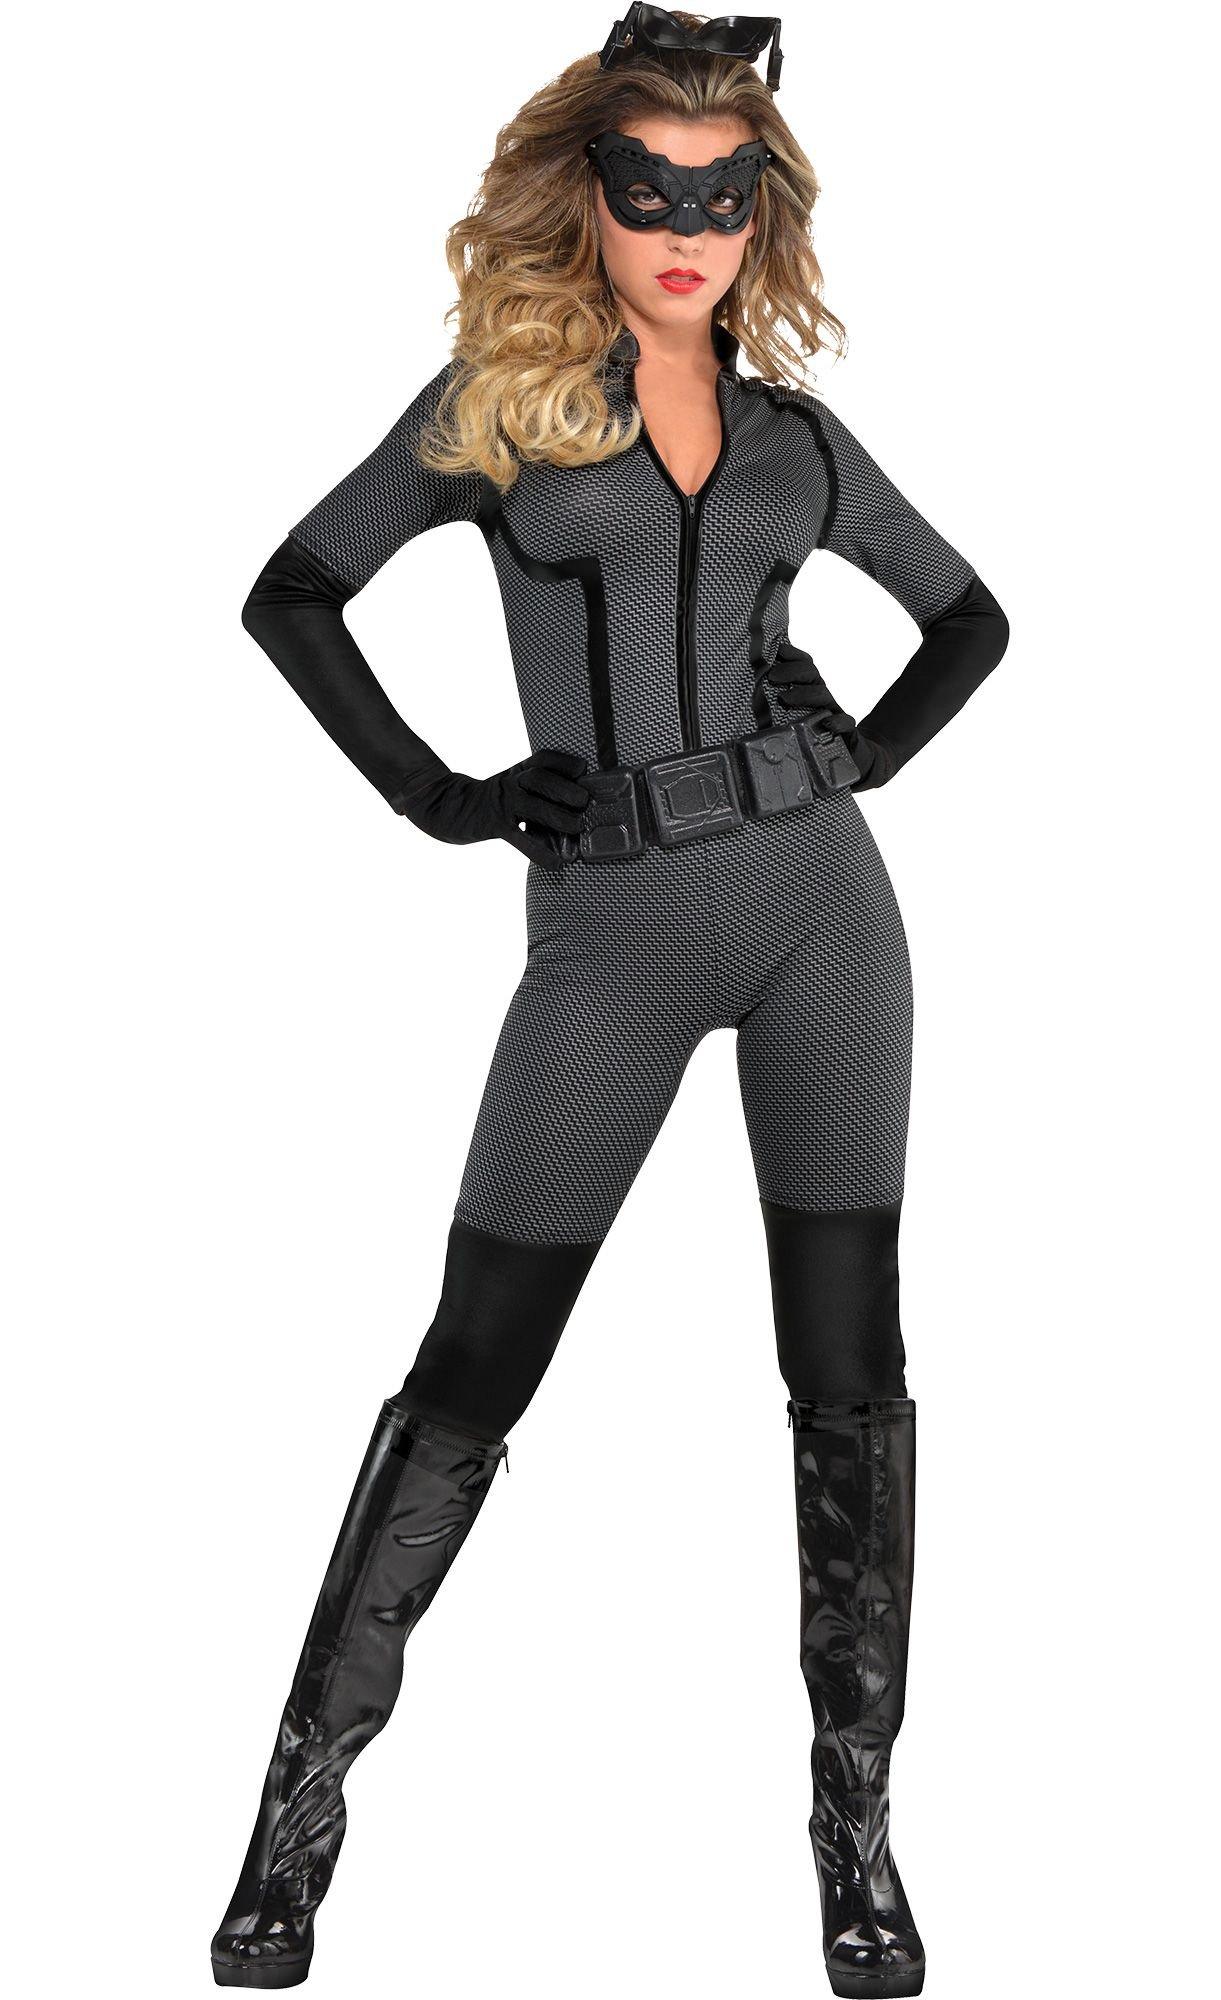 Adult Catwoman Costume - The Dark Knight Rises Batman | Party City